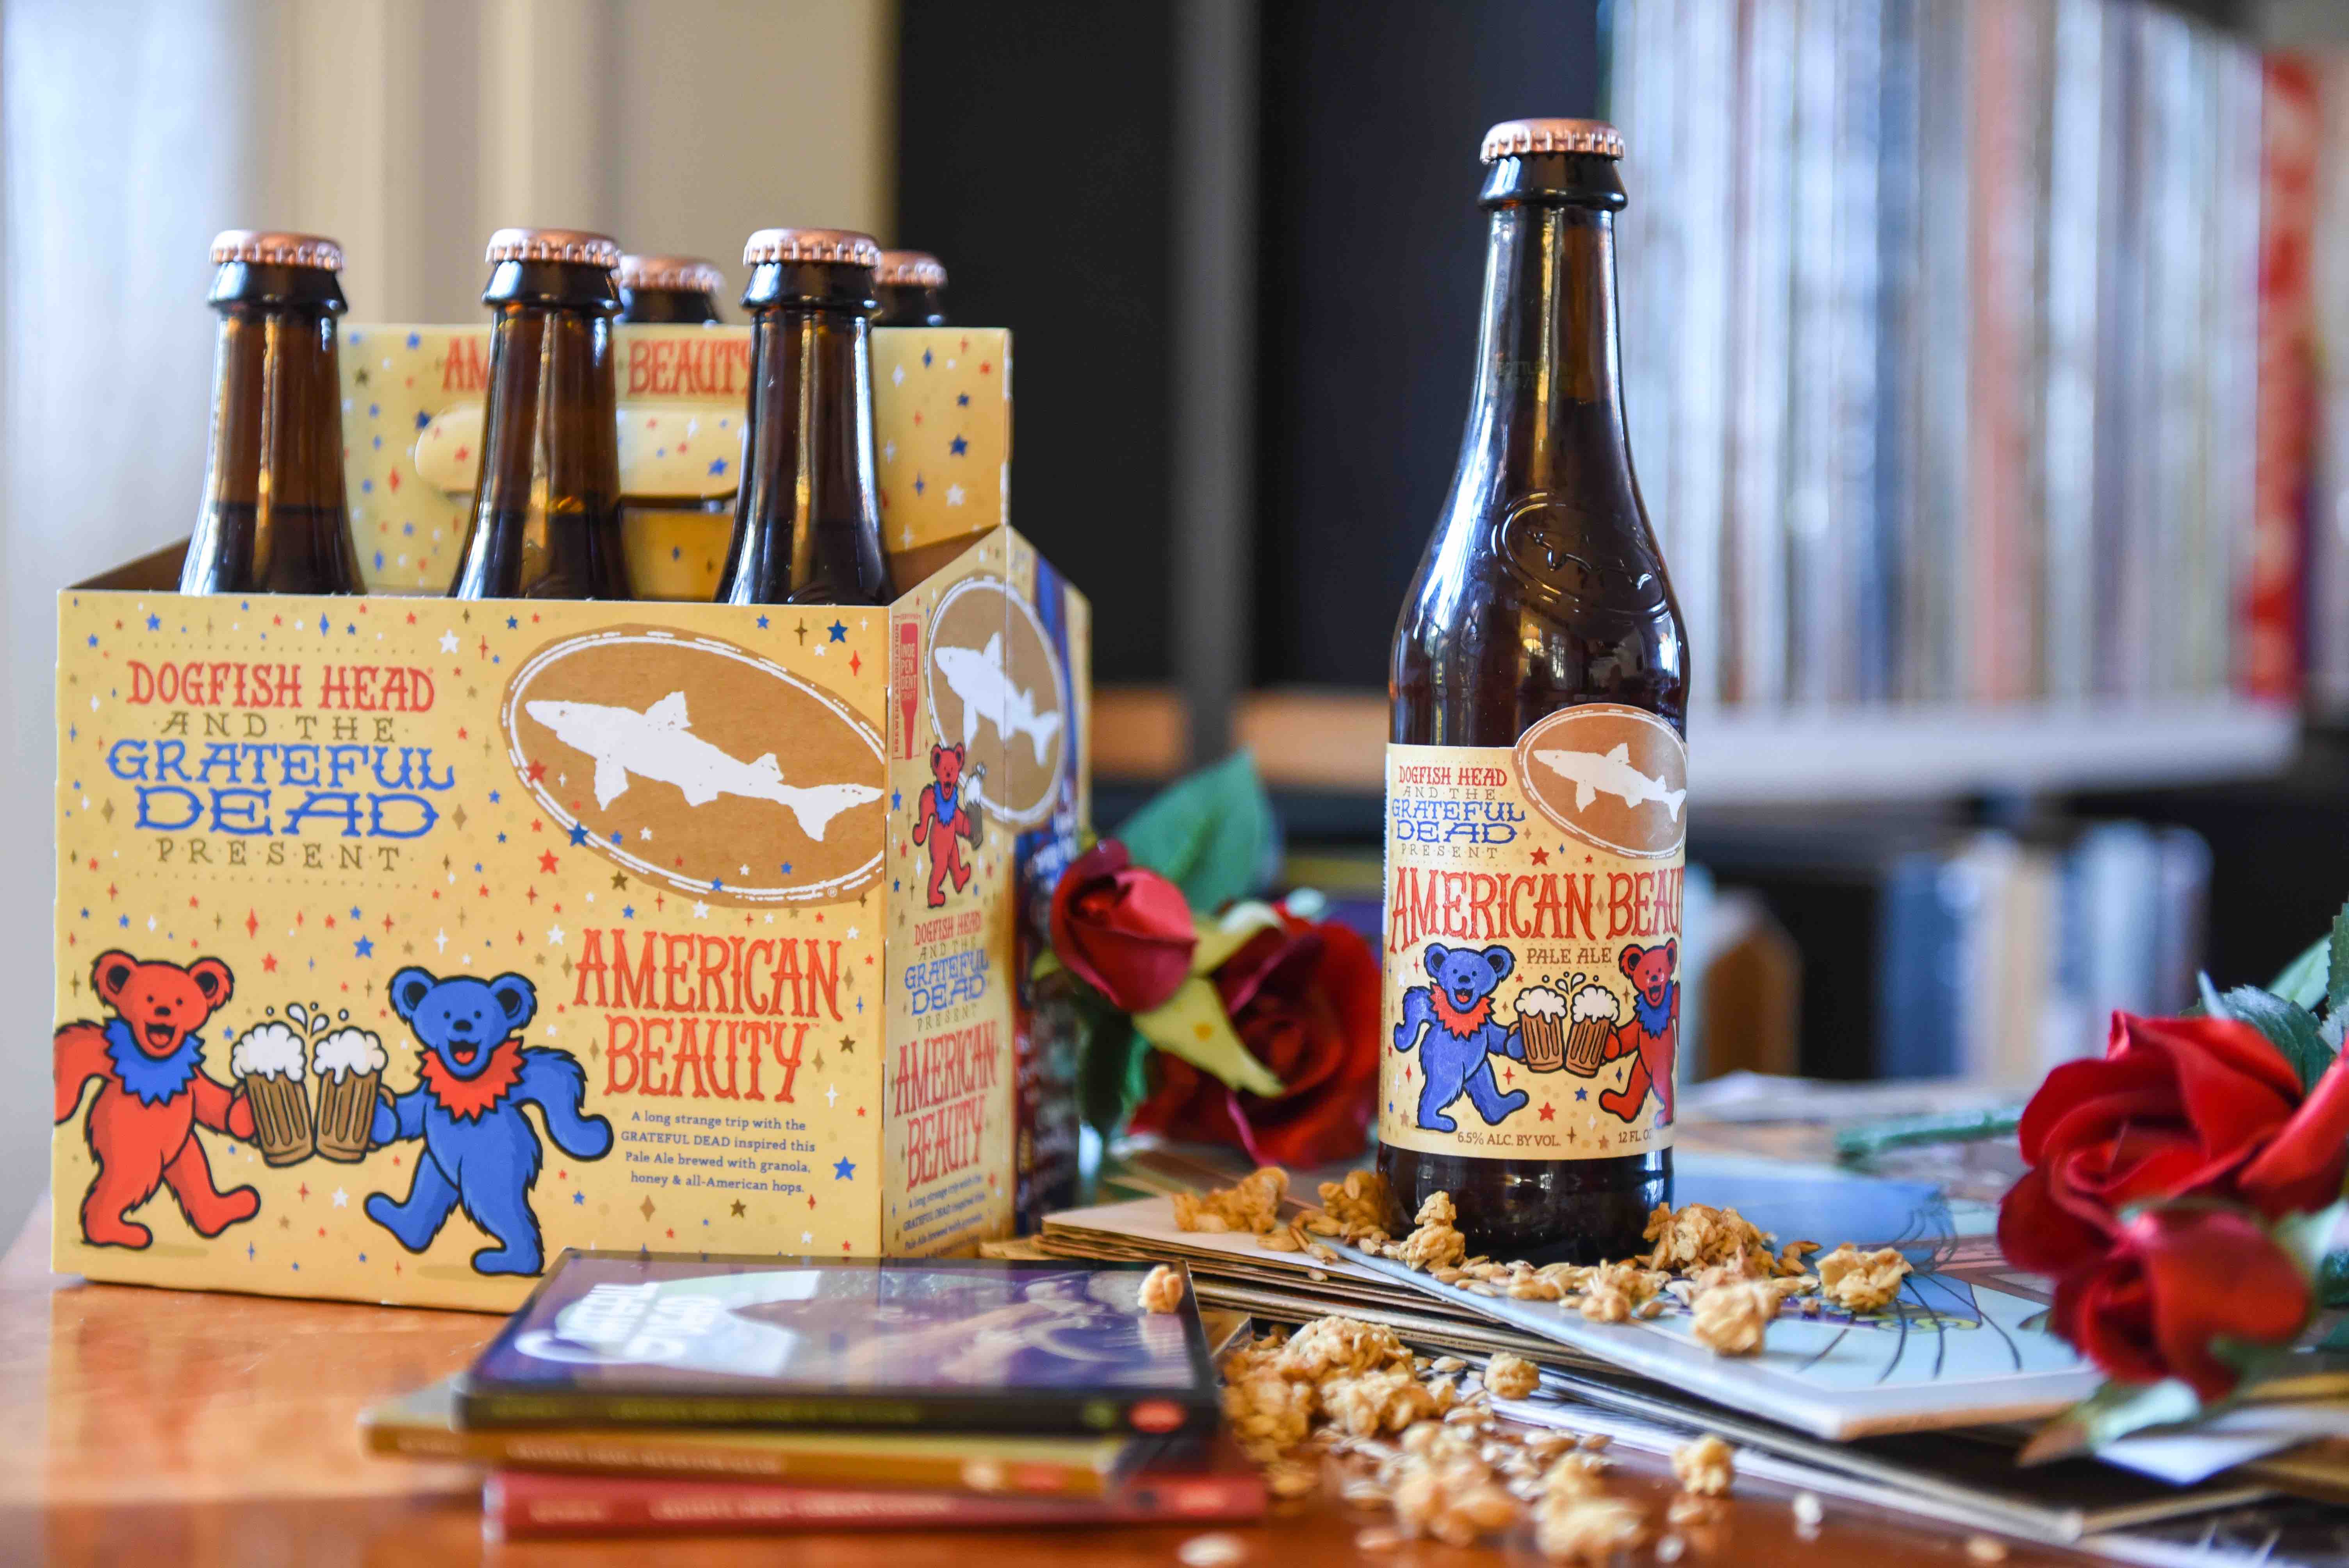 image of American Beauty courtesy of Dogfish Head Craft Brewery